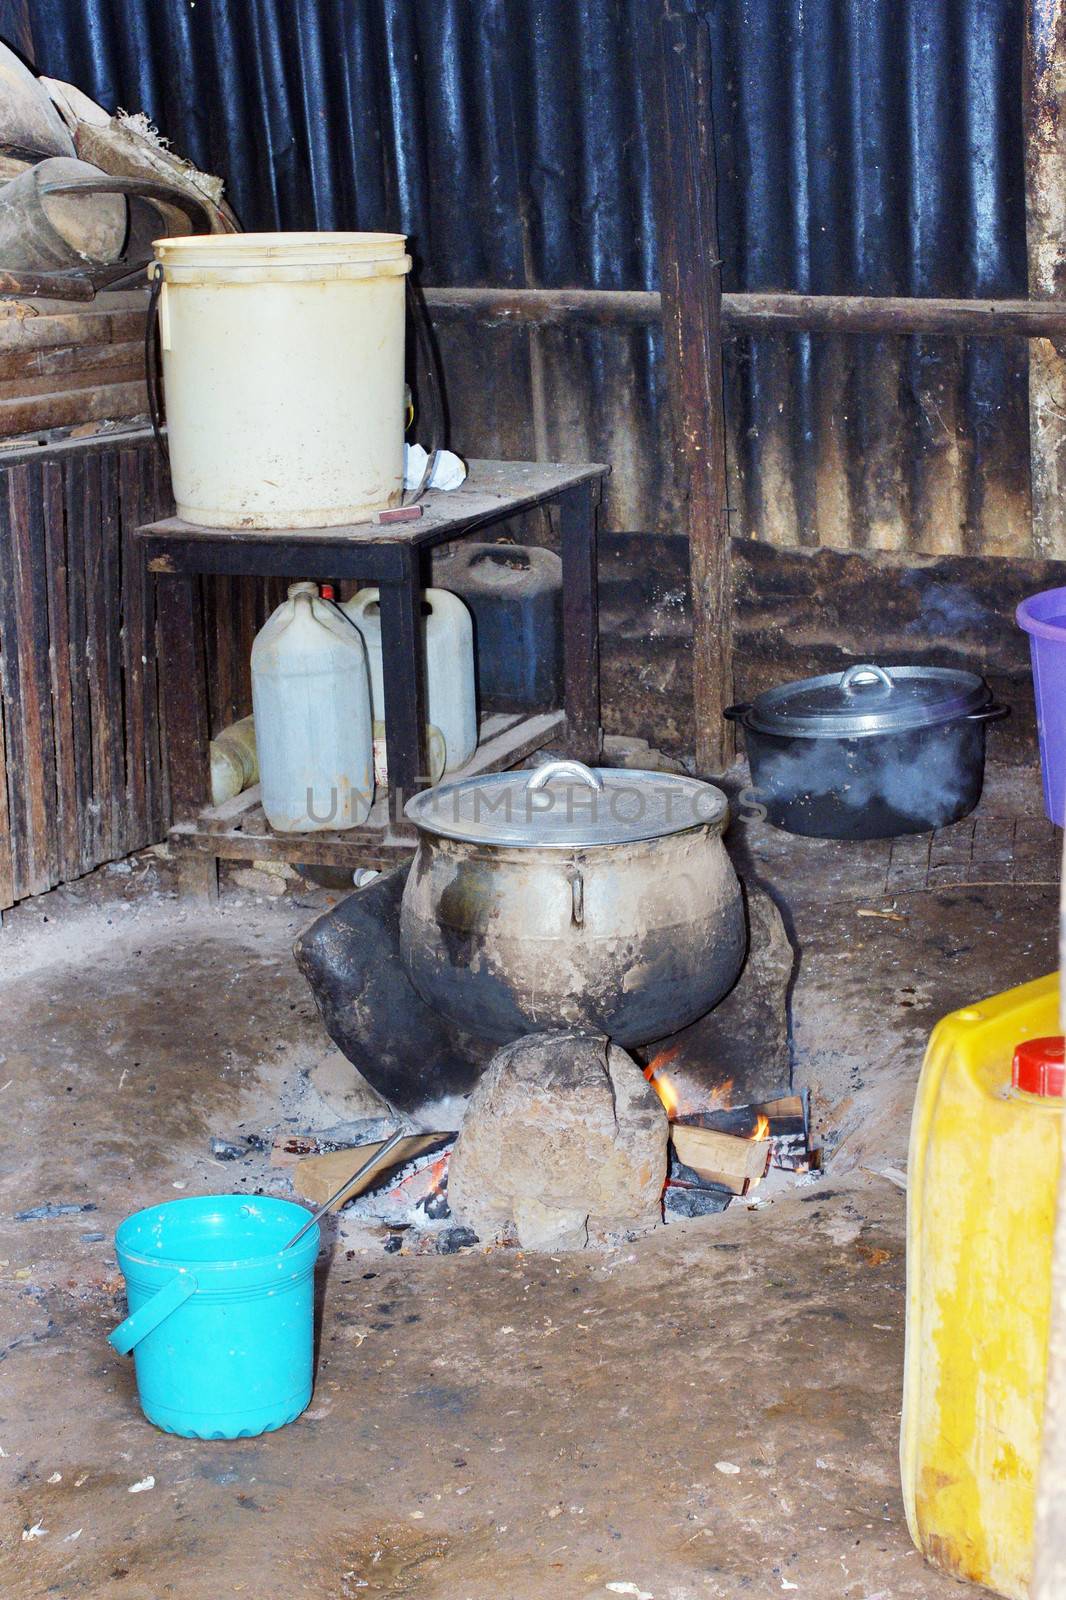 Typical African kitchen, cooking food over wood and charcoal fire